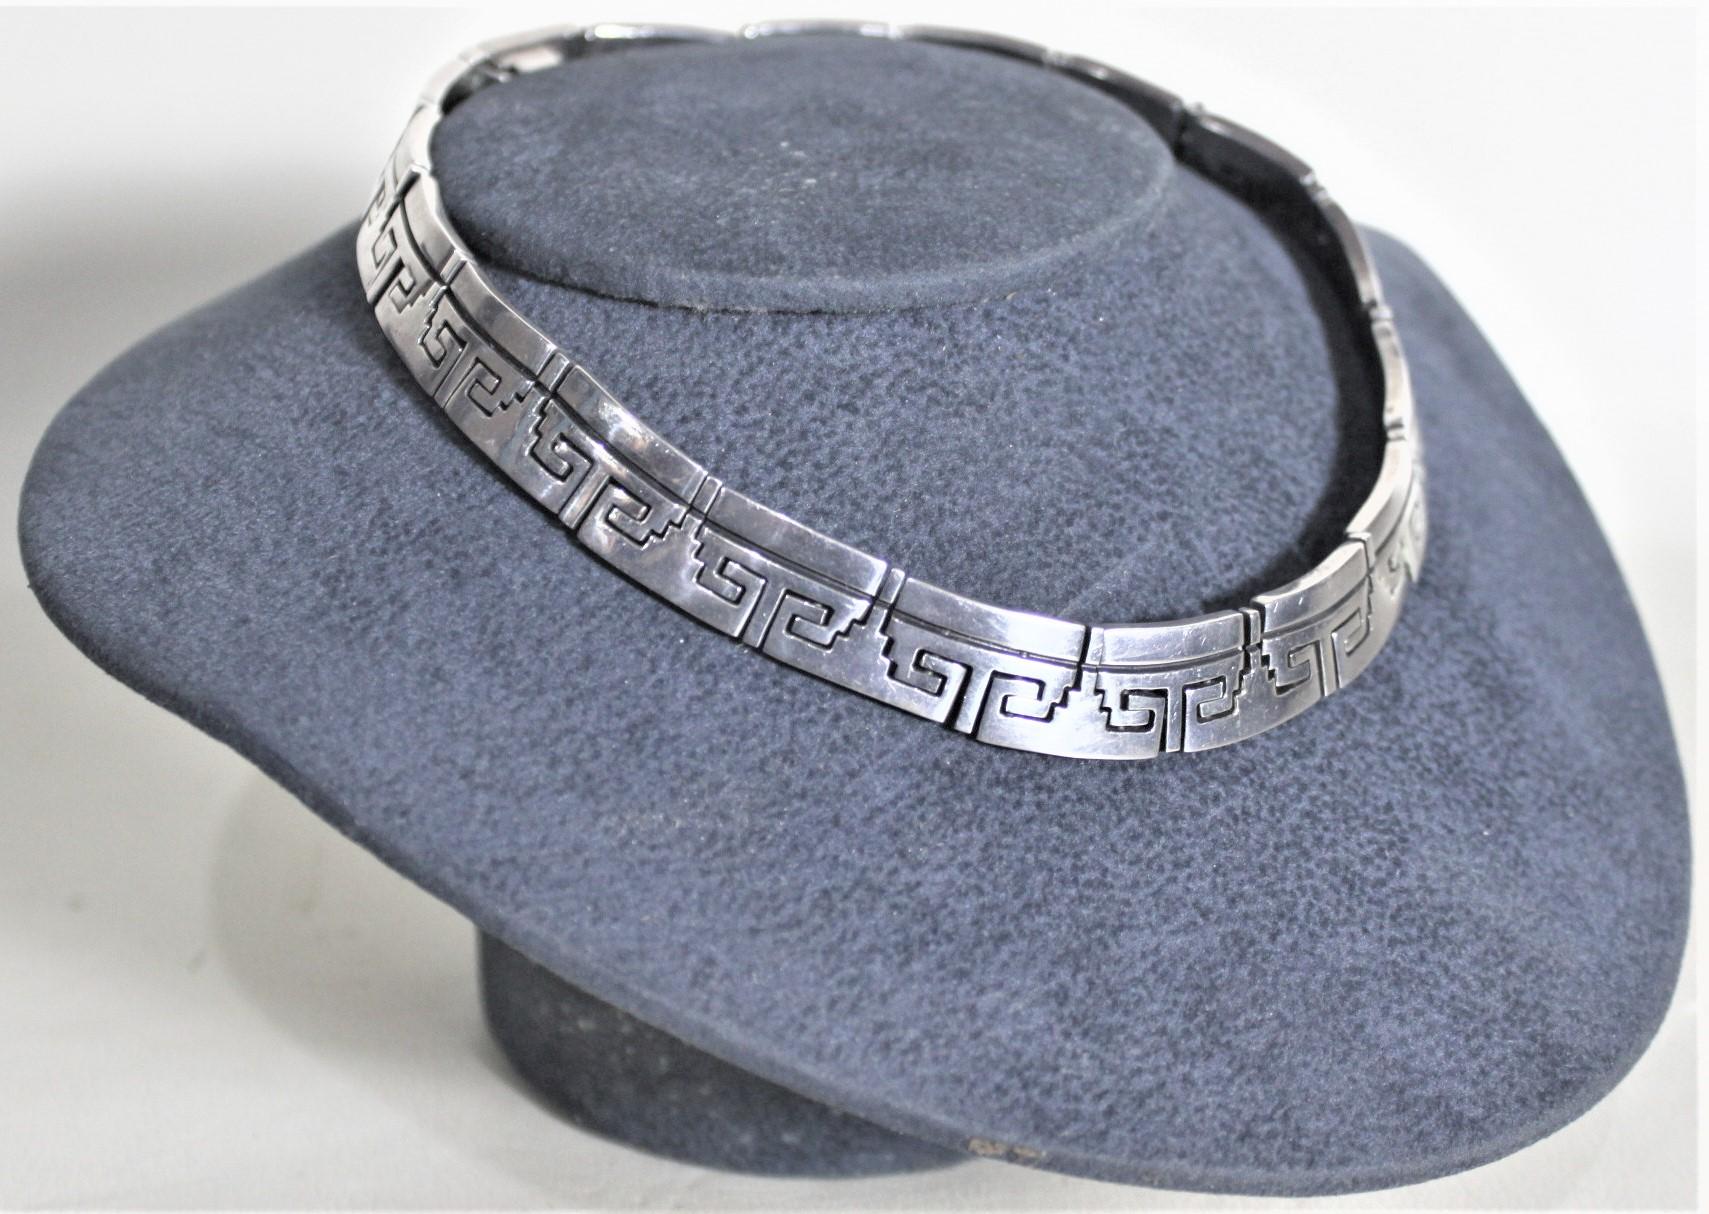 This chunky sterling silver ladies choker necklace was made in Mexico in approximately 1970 in a Mid-Century Modern style. The thick sterling silver links are geometrically shaped in a stylized Aztec manner, and have some simple accenting